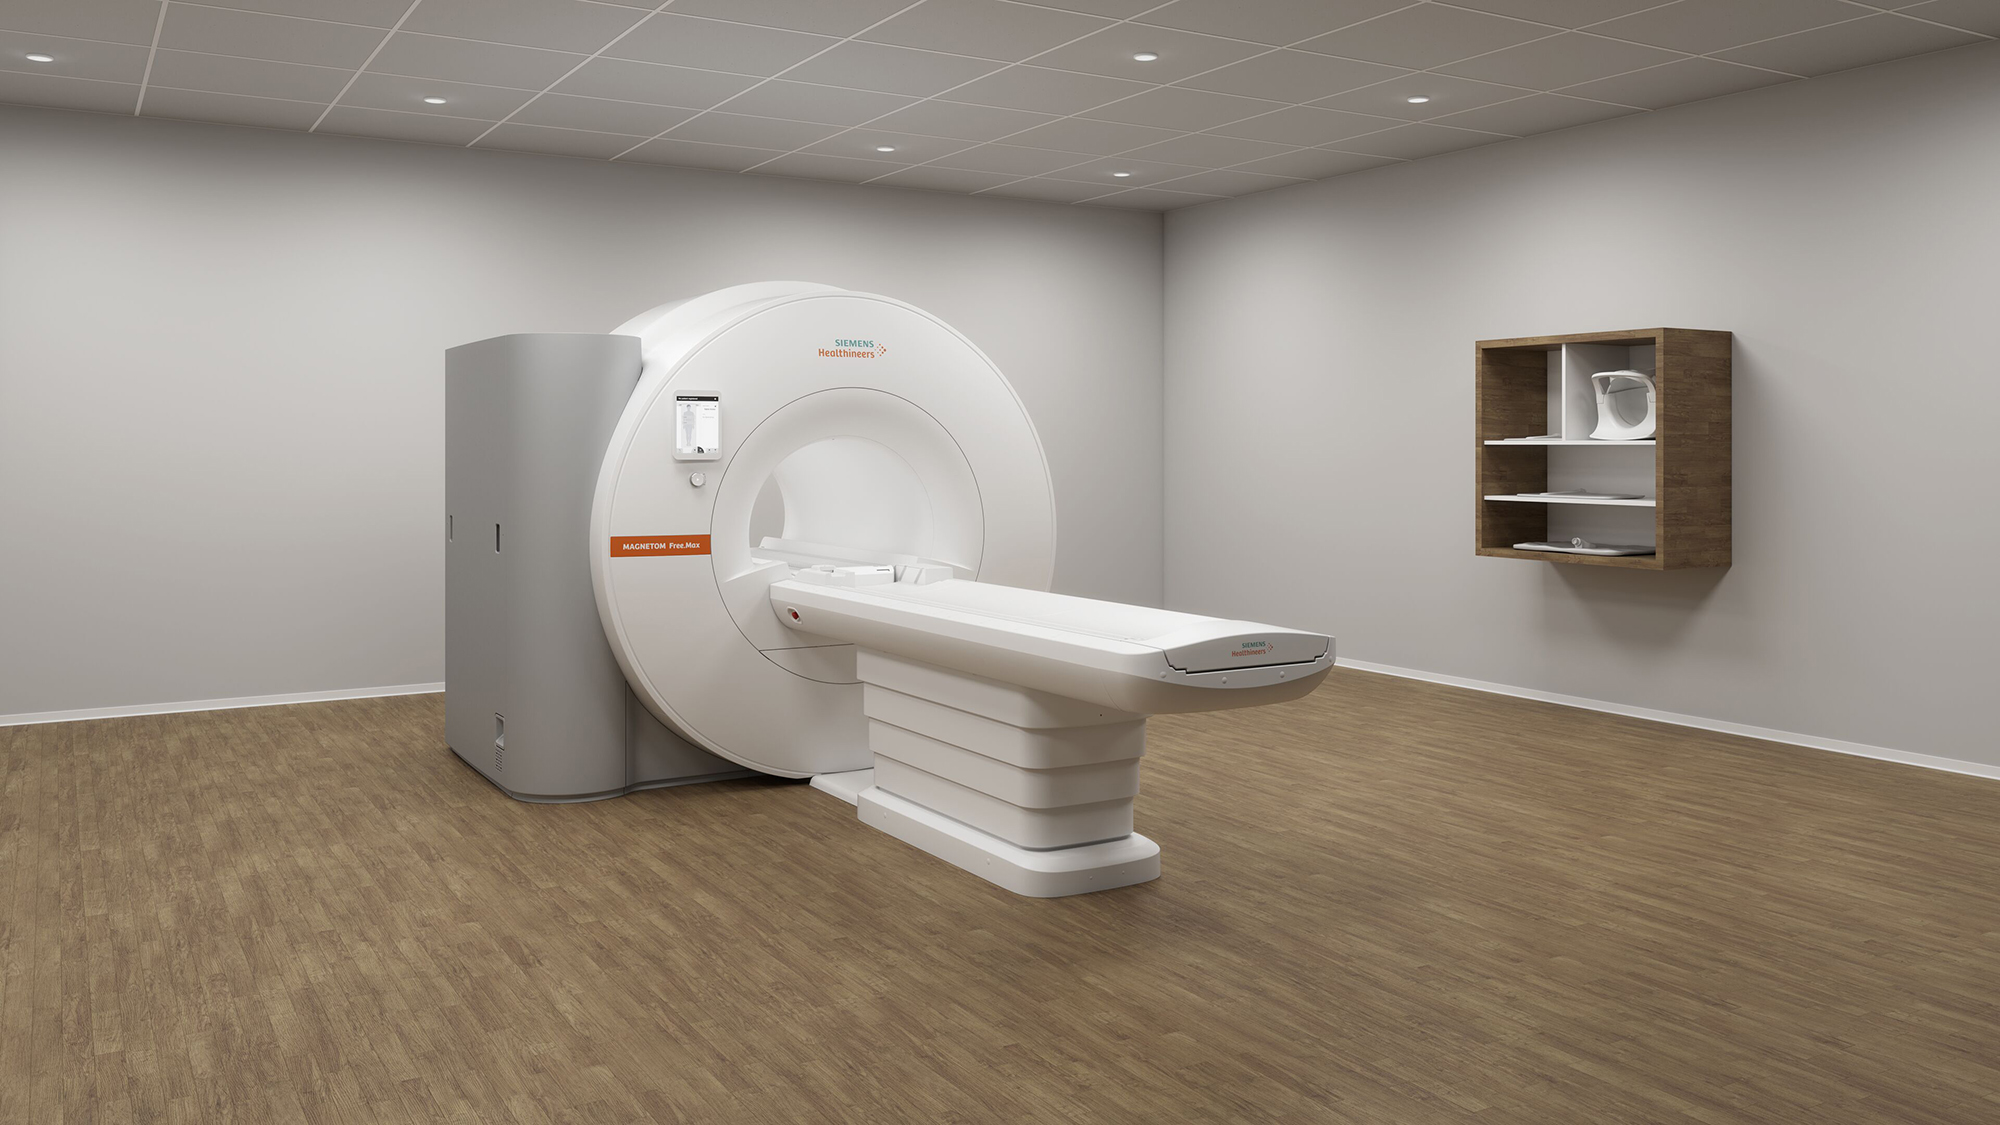 An image of the new MAGNETOM Free.Max (0.55T) MRI scanner from Siemens Healthineers